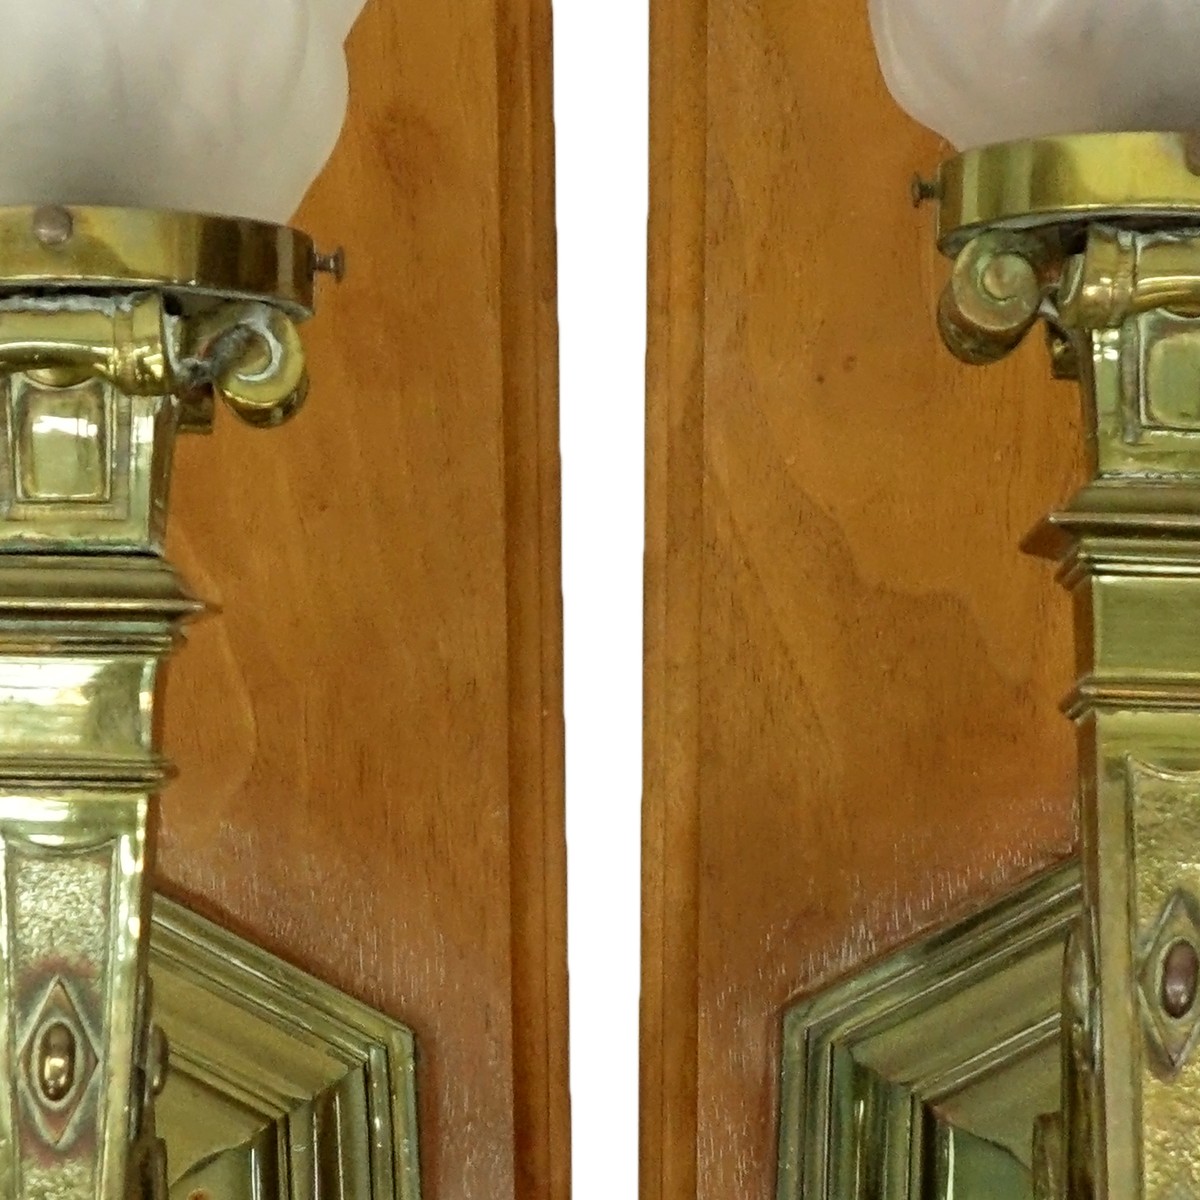 Pair of Bronze Wall Sconces with Frosted Glass Shade, Mounted on Wood Backi